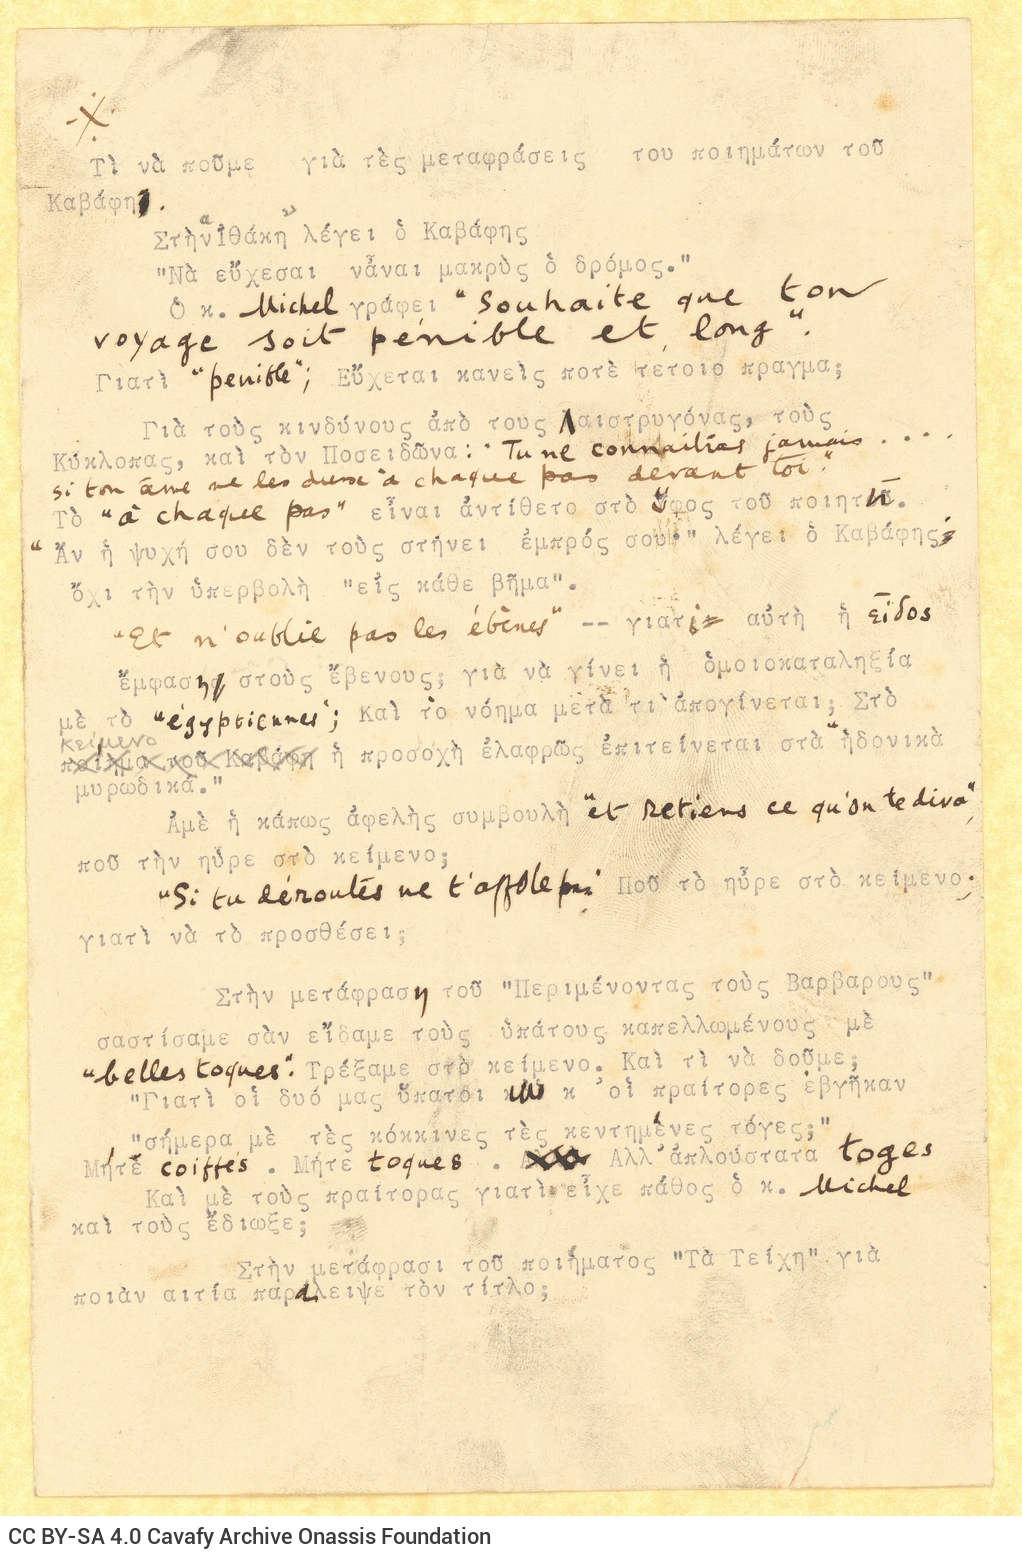 Typewritten text on one side of a sheet, with handwritten additions of verses by Cavafy. The verses are from the French trans